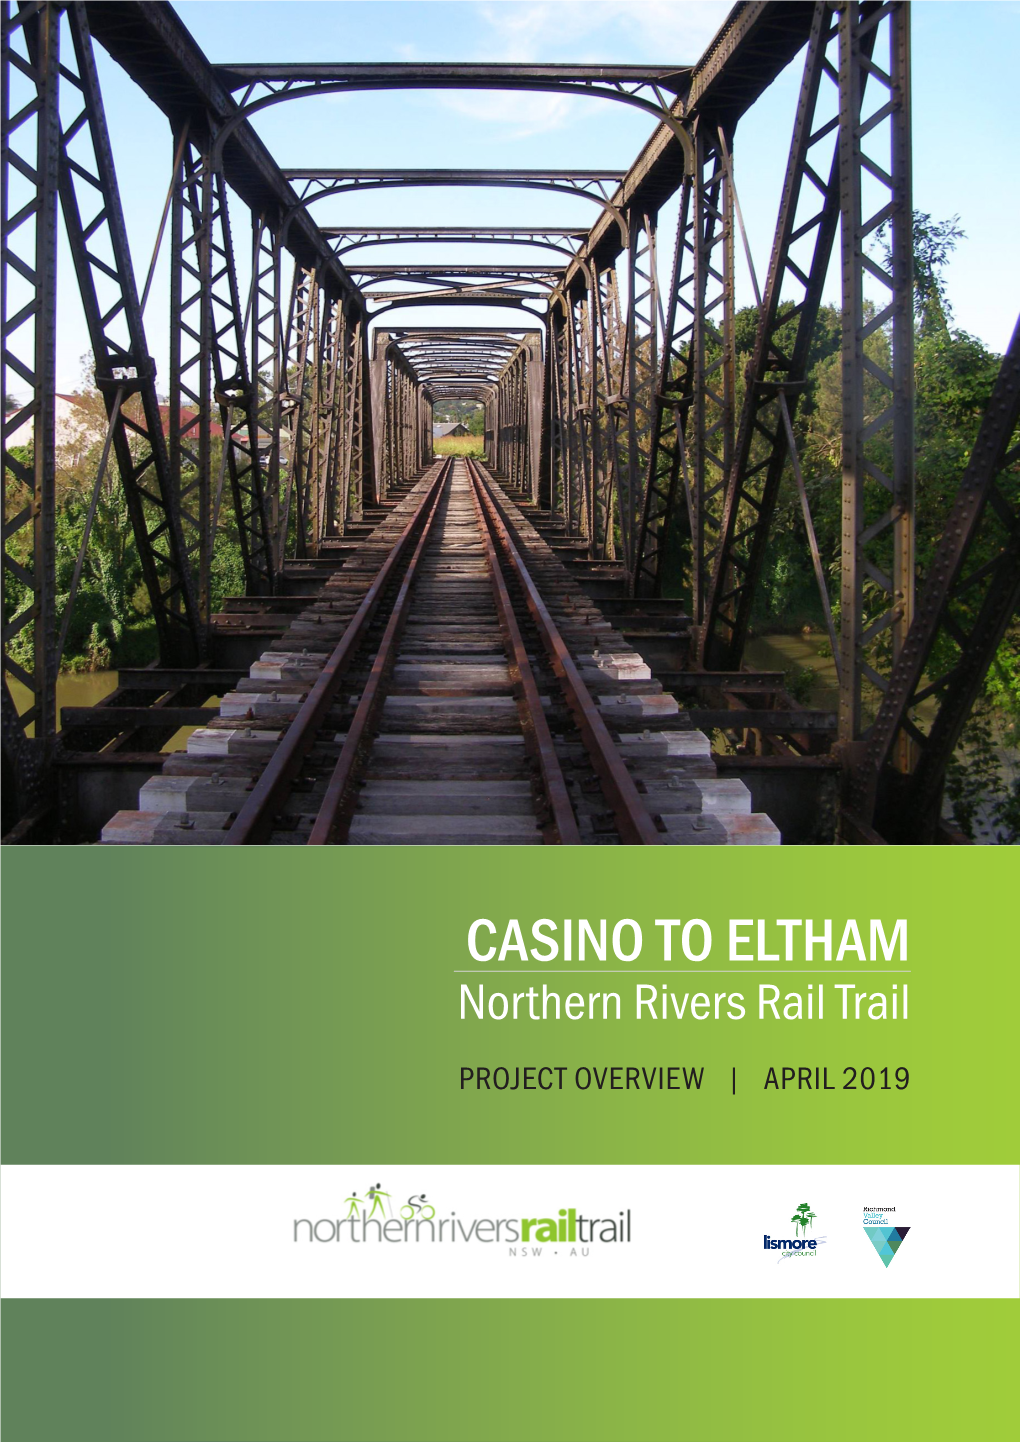 Casino to Eltham Overview